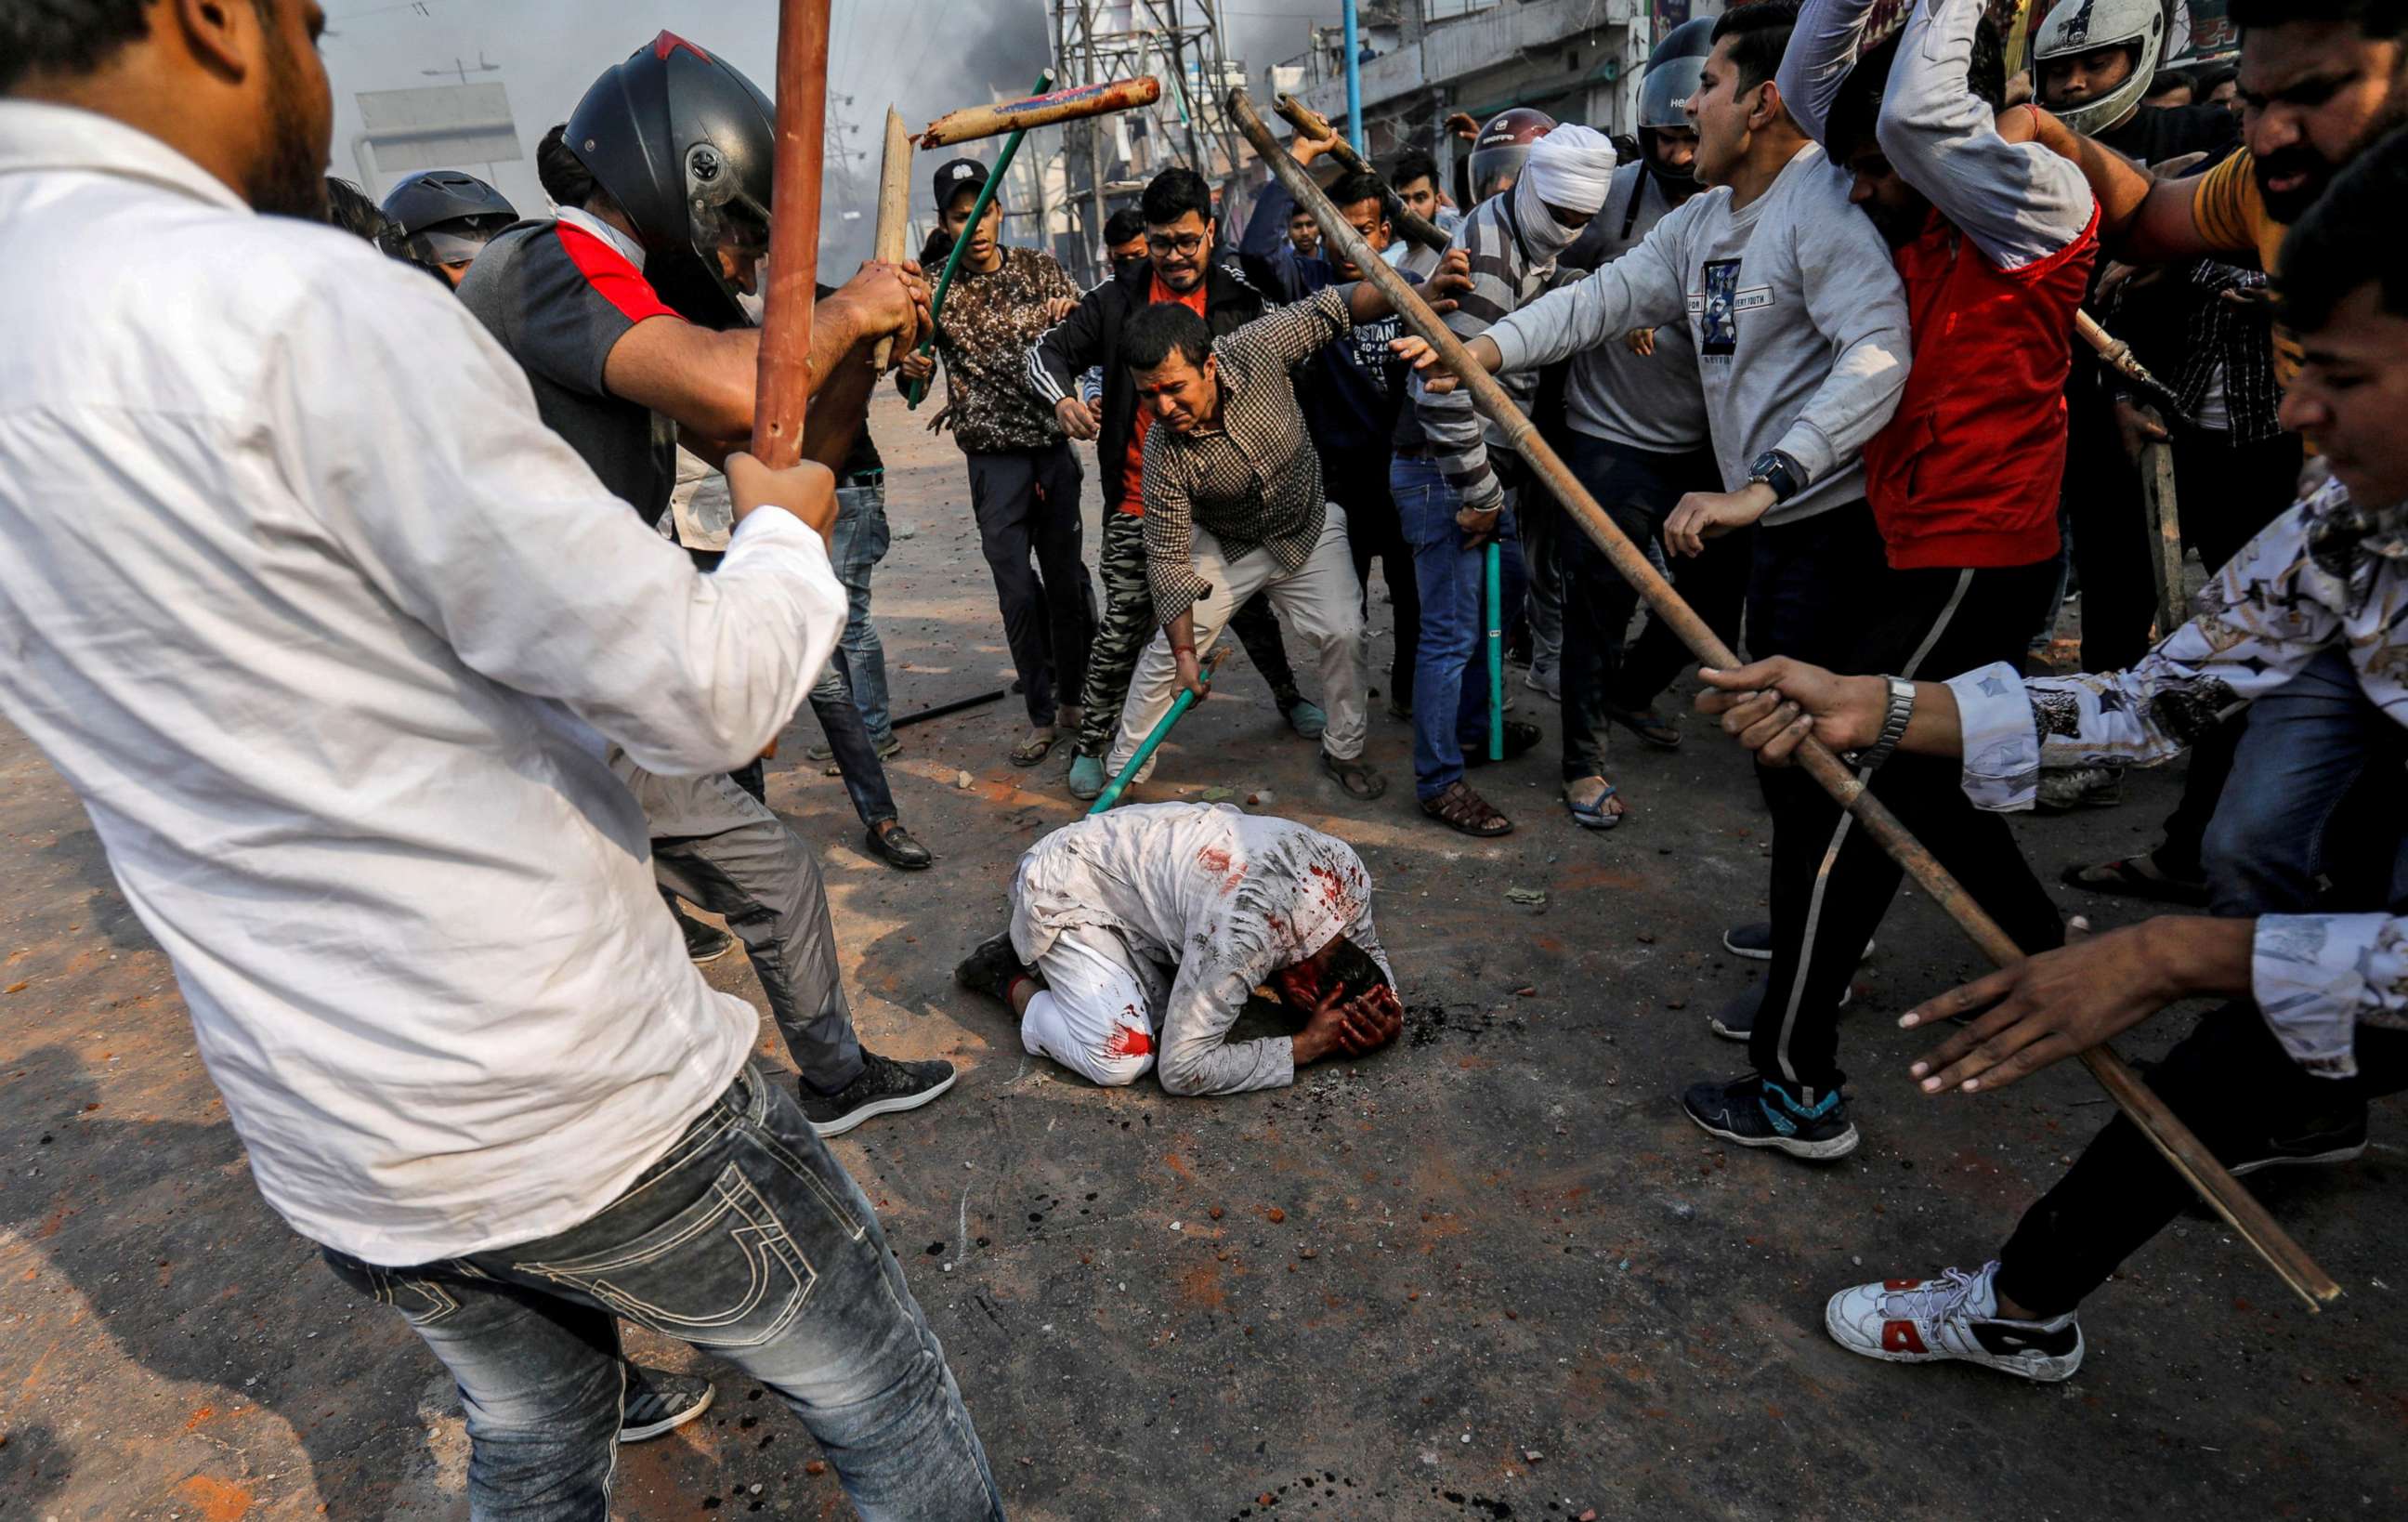 PHOTO: A group of men chanting pro-Hindu slogans beat Mohammad Zubair, 37, who is Muslim, during protests sparked by a new citizenship law in New Delhi, Feb. 24, 2020.